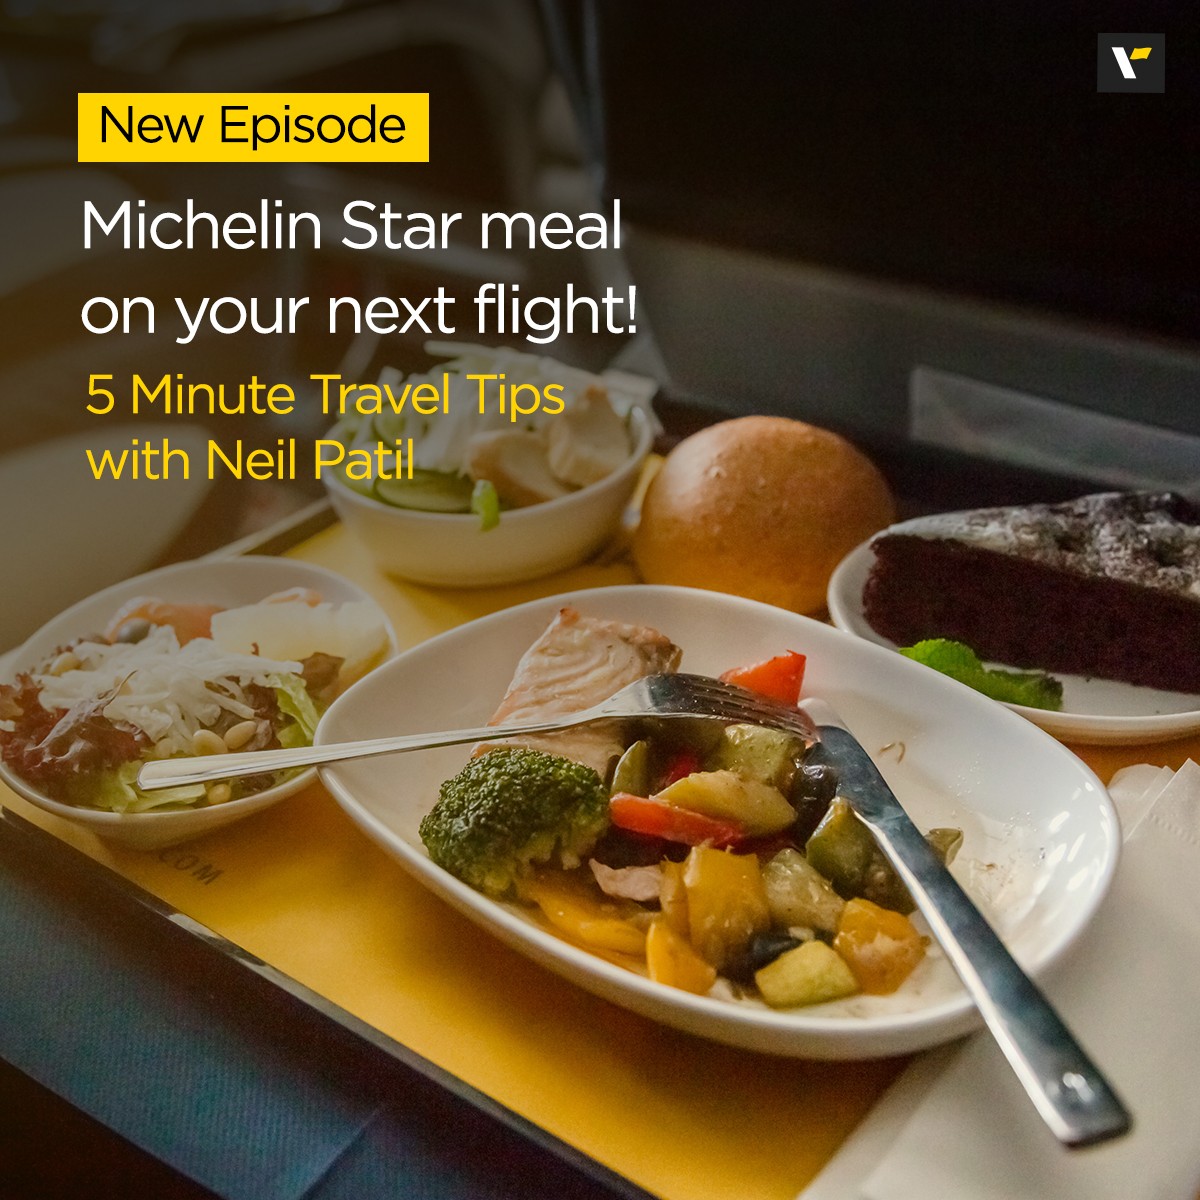 Michelin Star meal on your next flight!